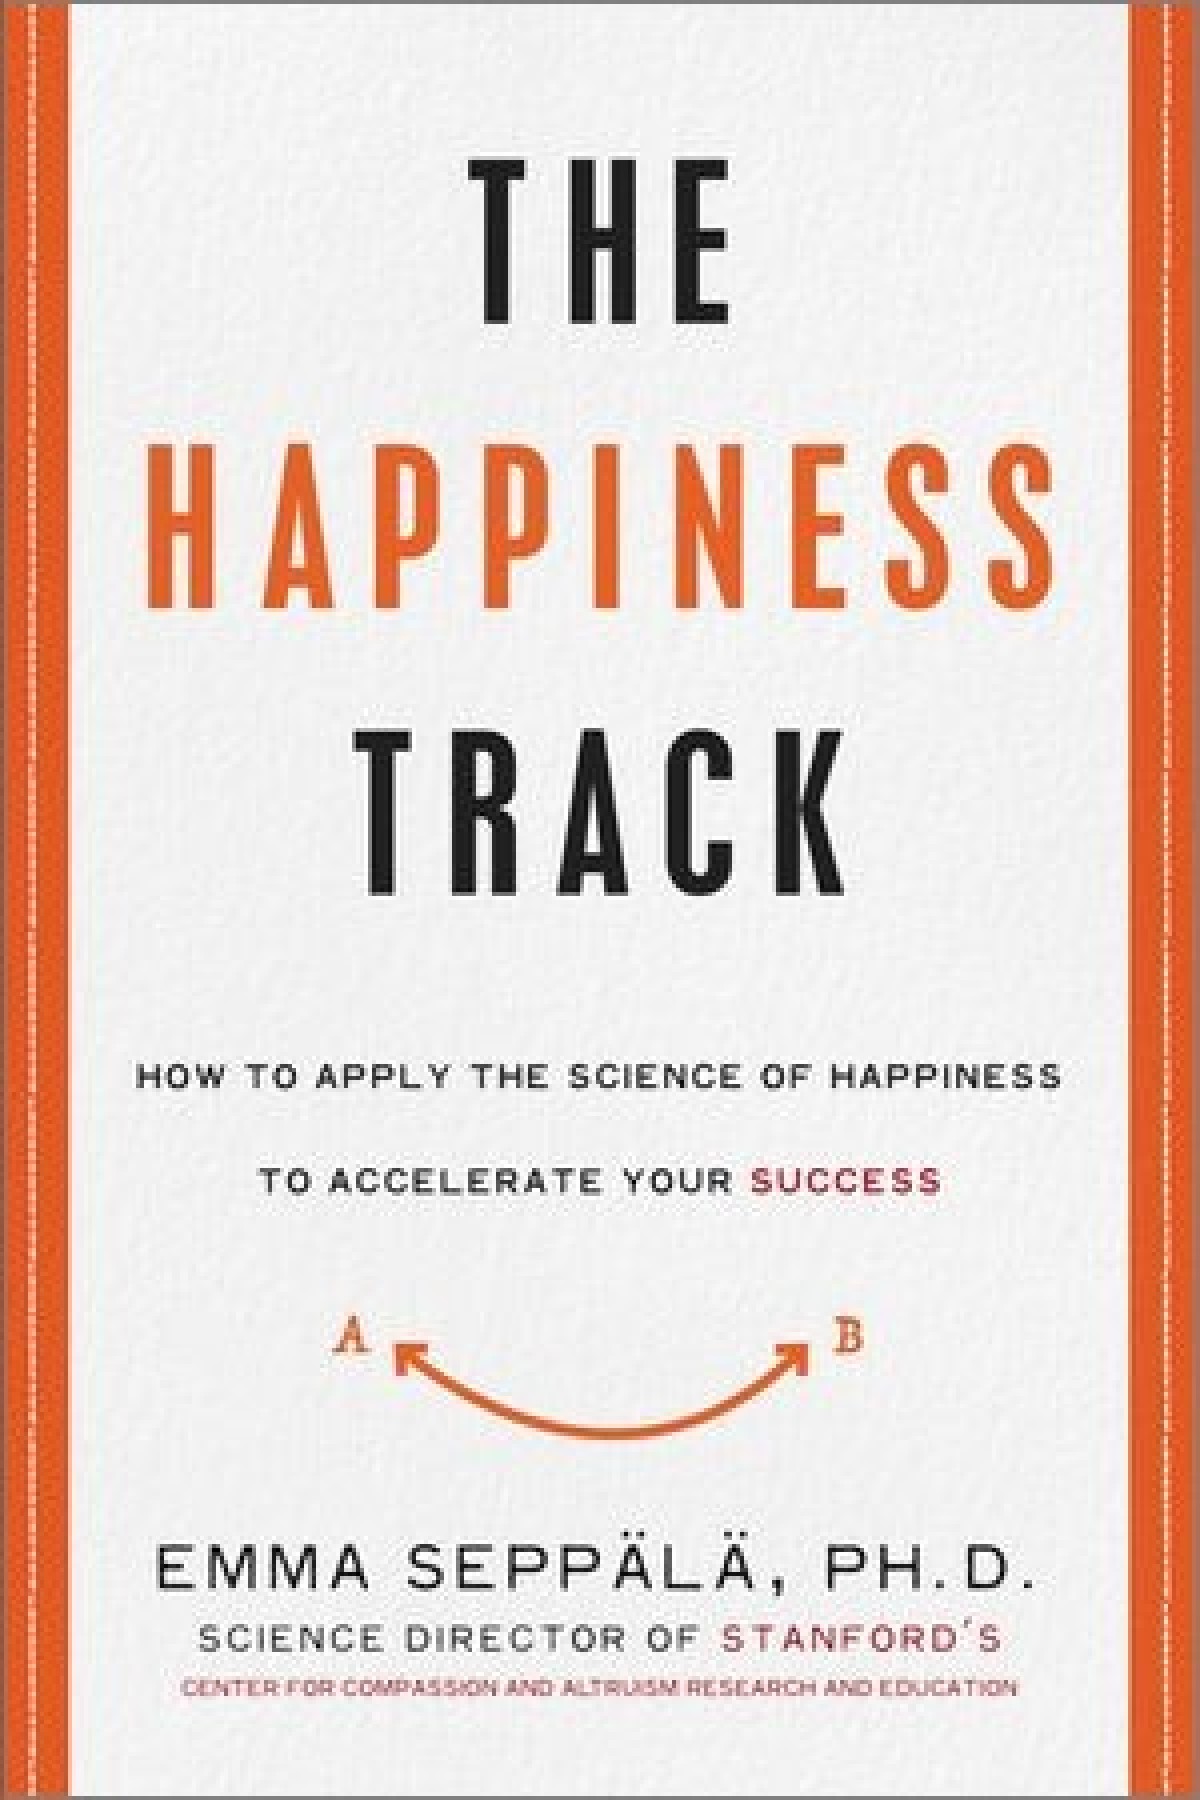 The happiness track: How to apply the science of happiness to accelerate your success